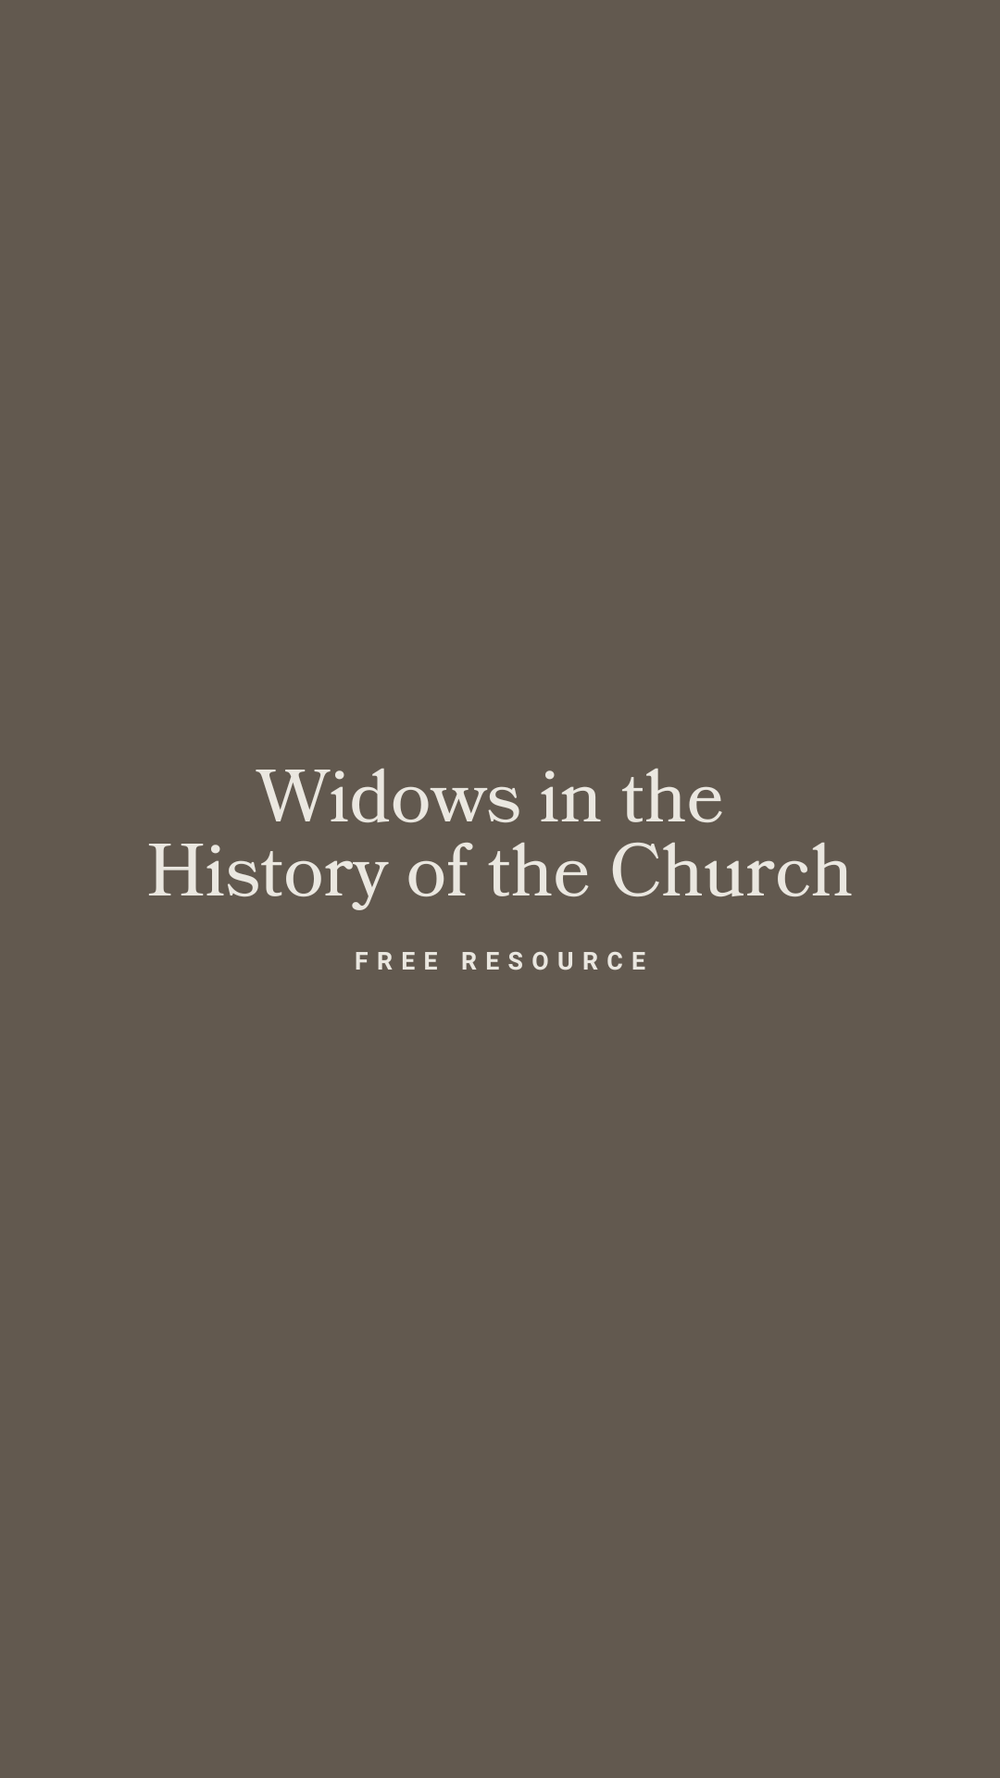 Widows in the History of the Church